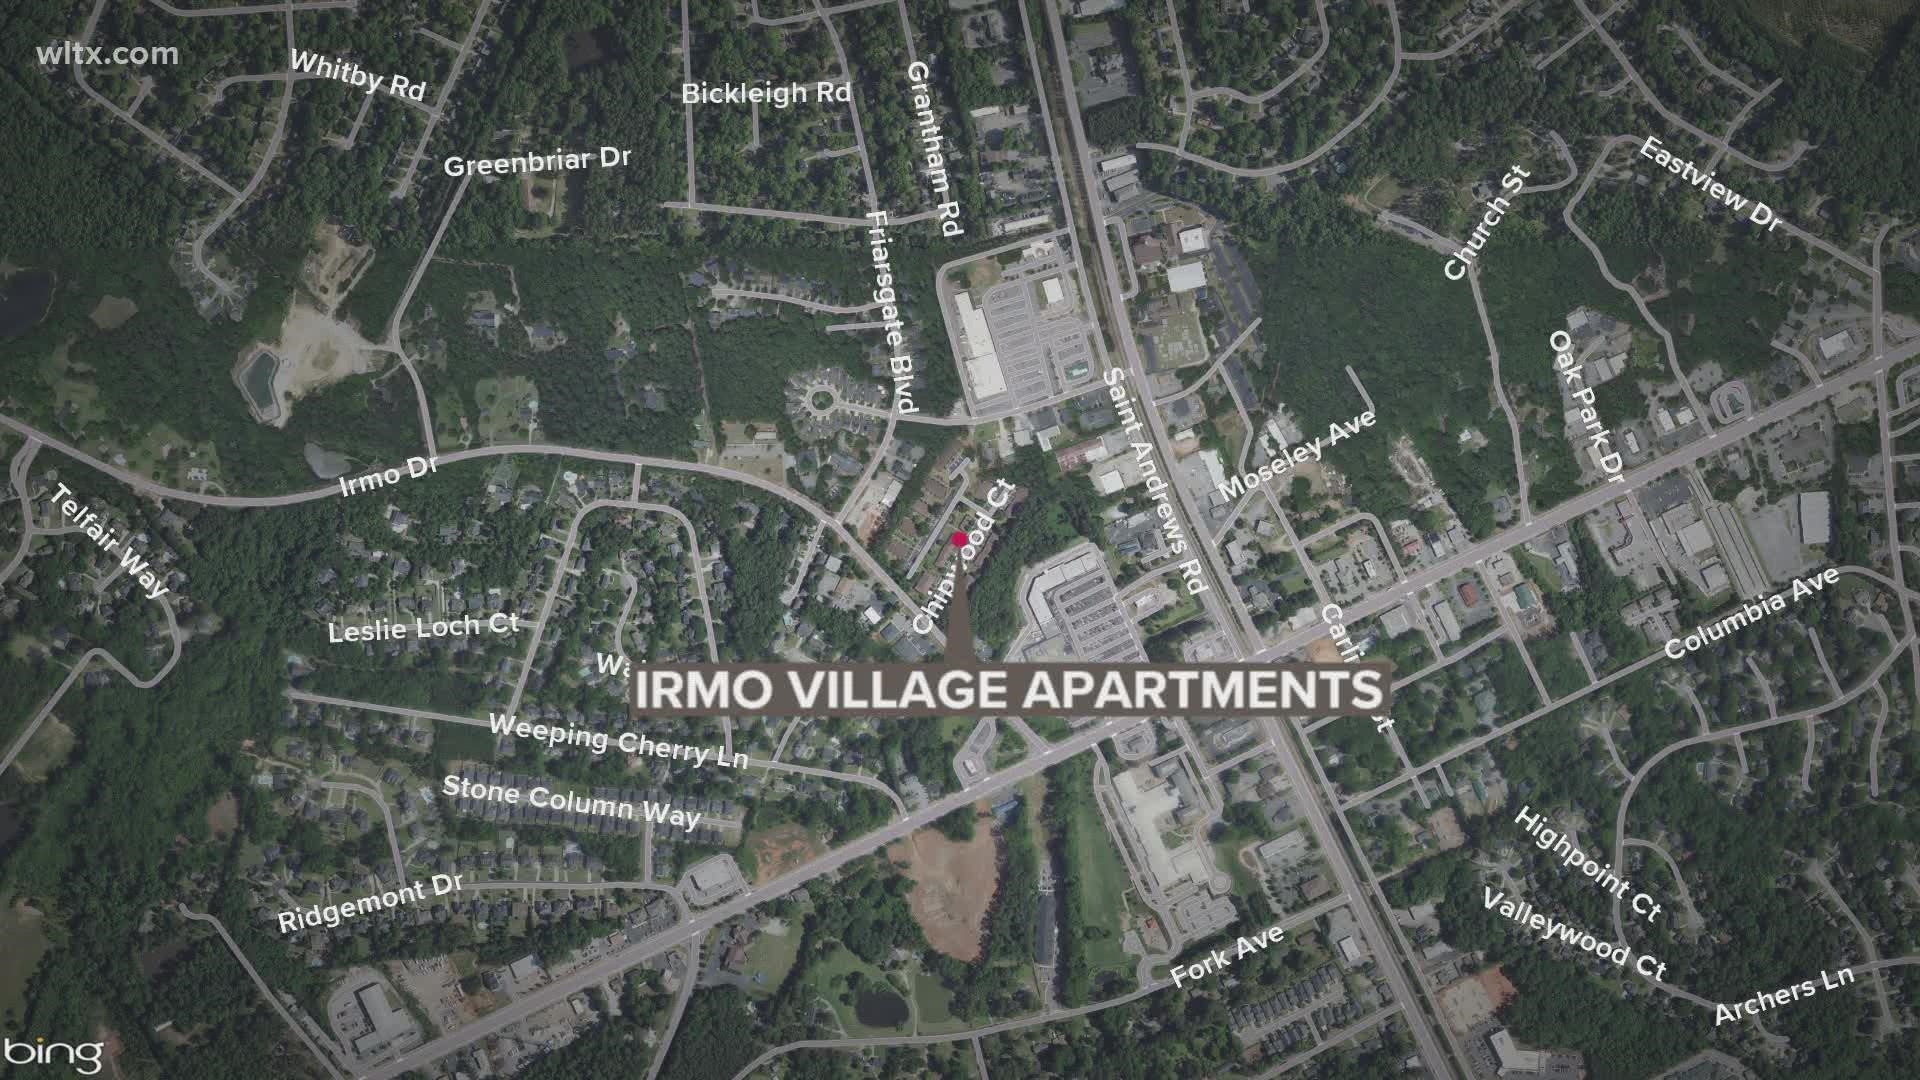 Police say the suspect shot someone in the leg at the Irmo Village Apartment complex.  He has turned himself in.